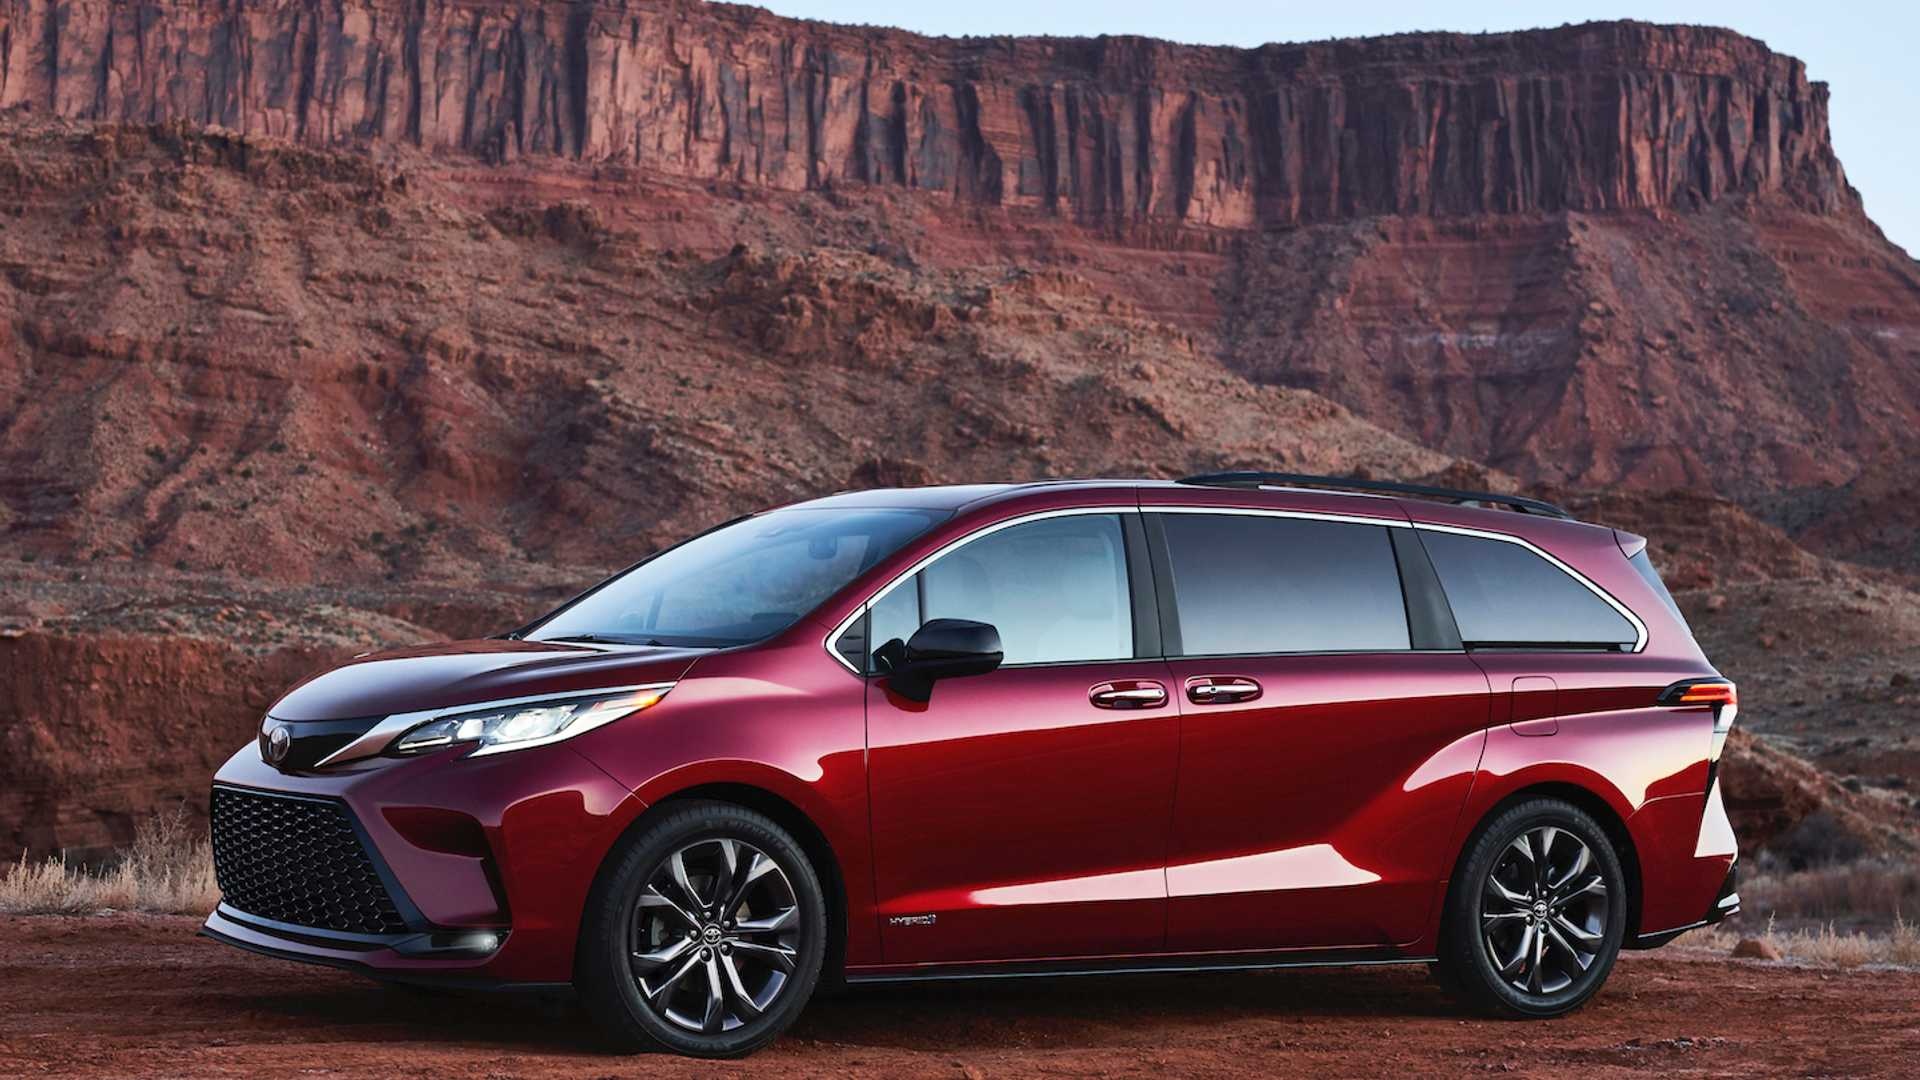 Toyota Sienna, Model year 2021, Updated version, New features, 1920x1080 Full HD Desktop